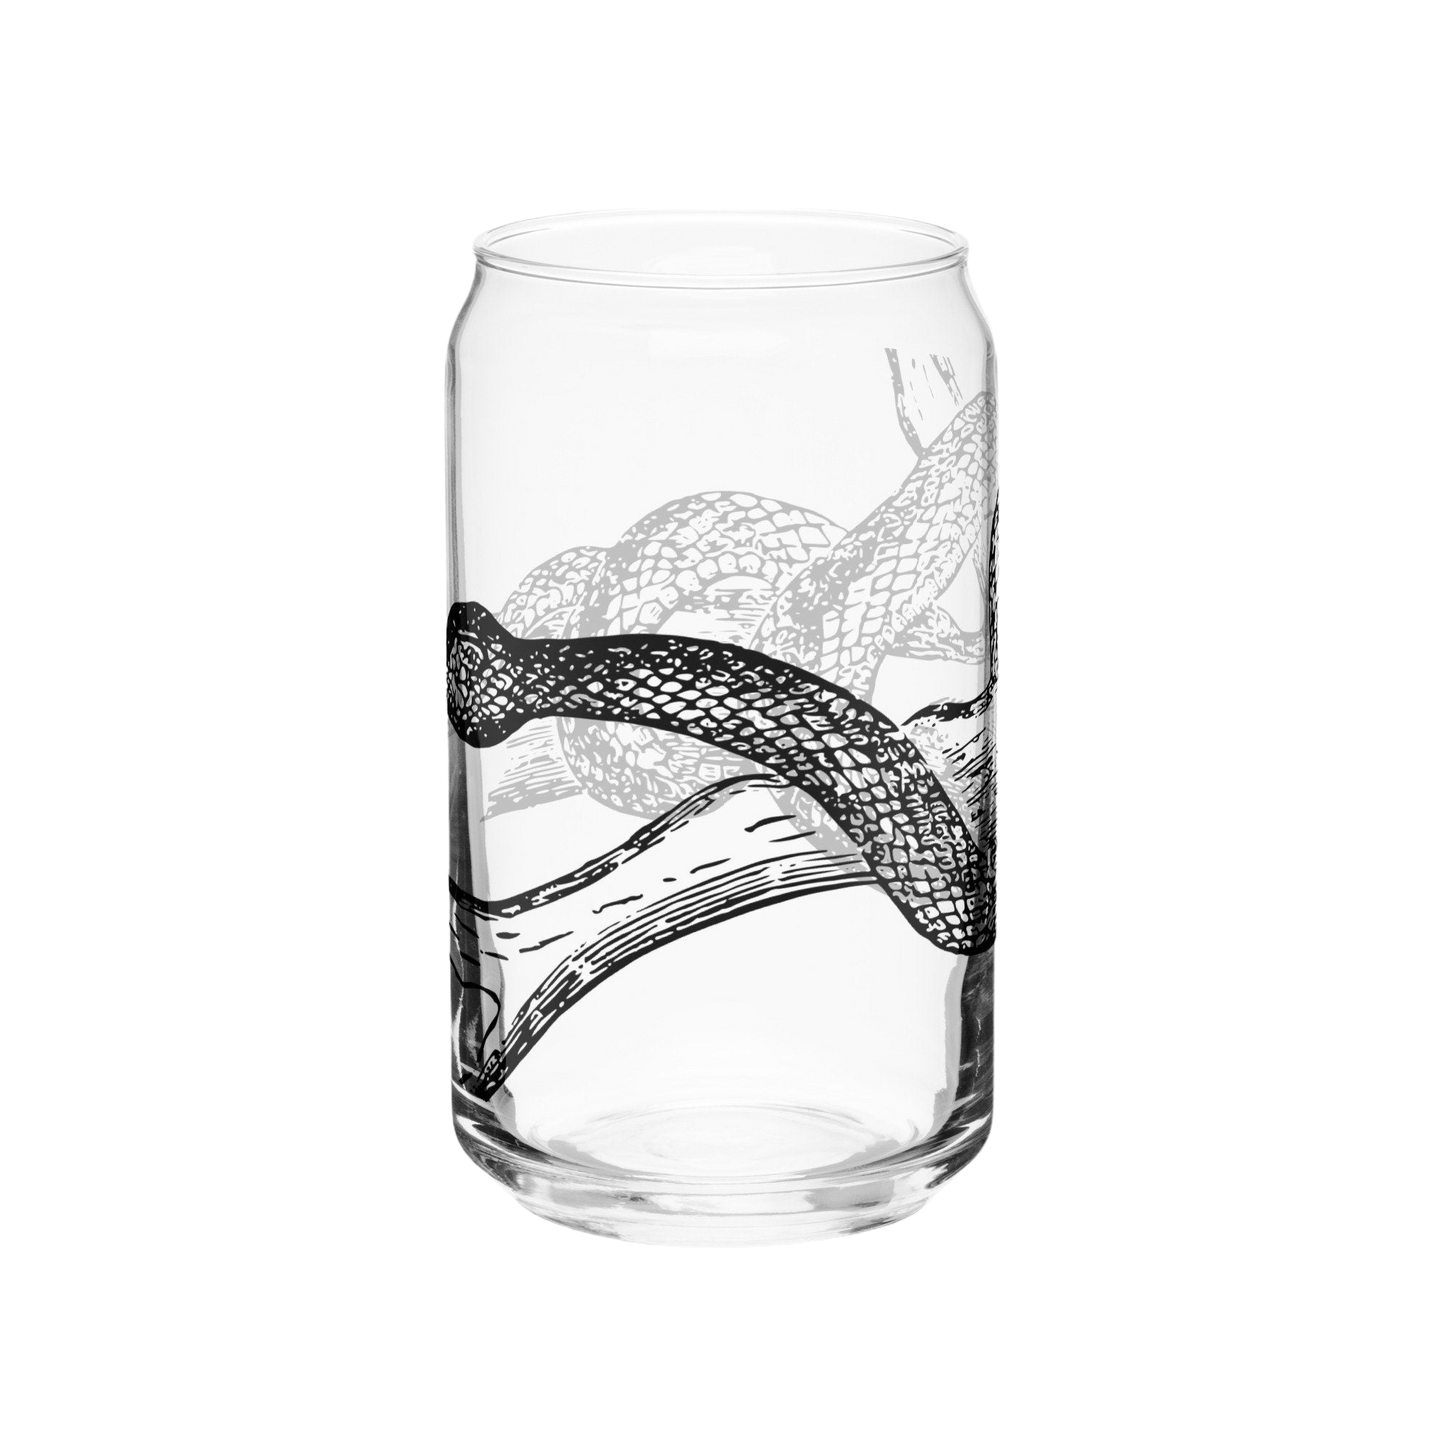 a glass with a snake on it on a black background